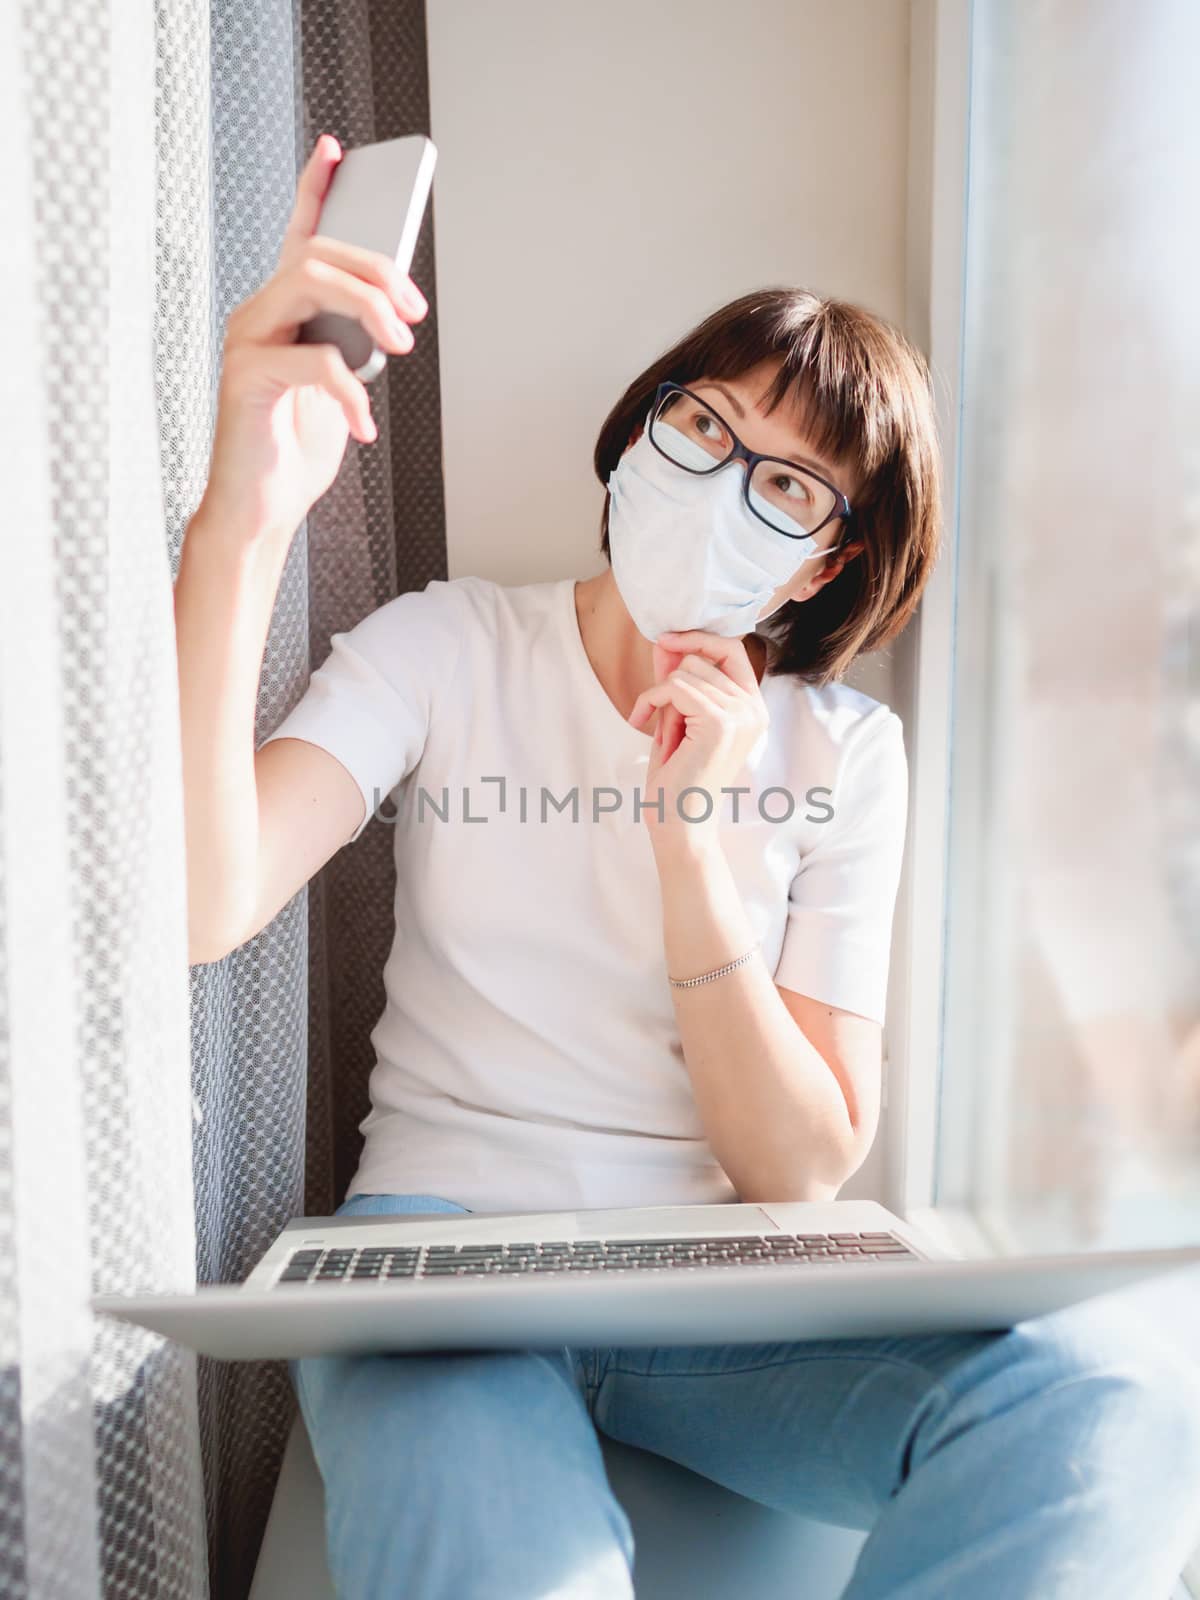 Pretty woman in medical mask works remotely from home. She is ma by aksenovko